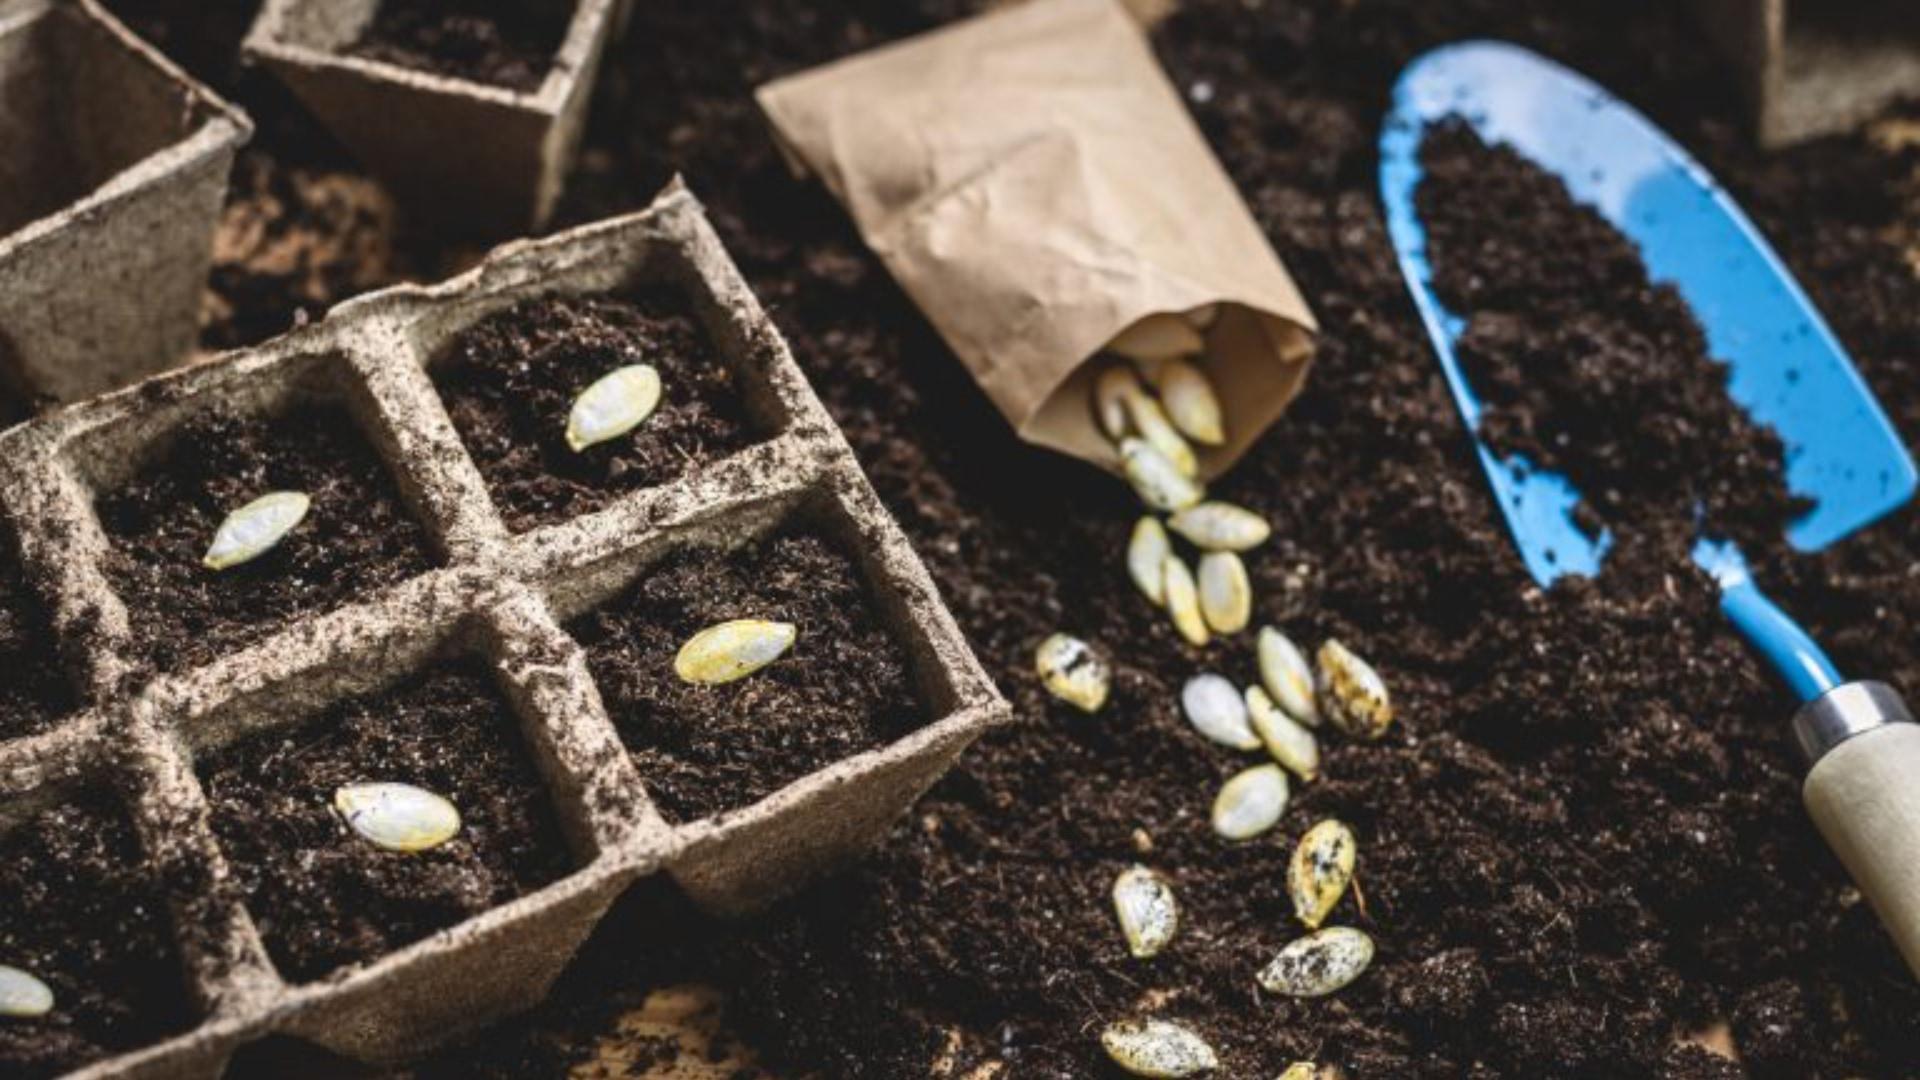 Join the 10th annual Seed Library launch and get ready to cultivate your green thumb